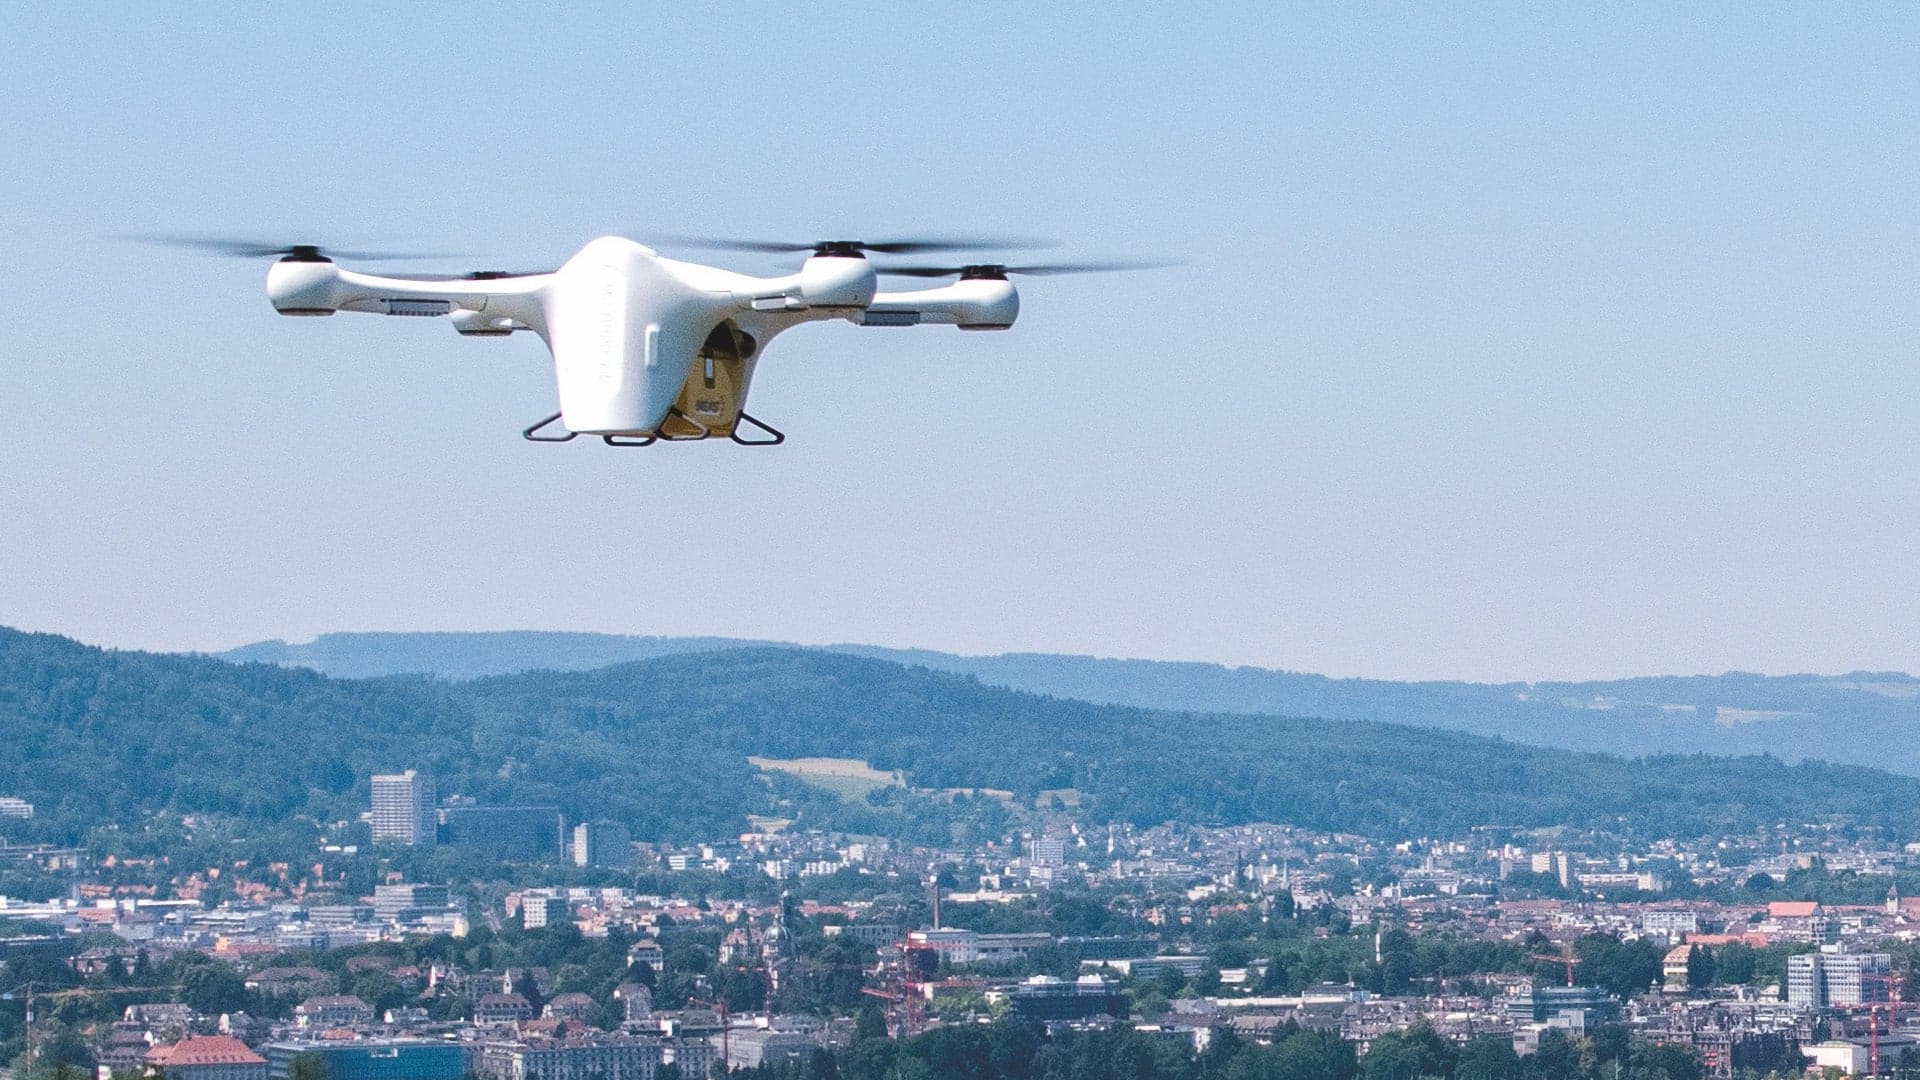 Matternet to Begin Medical Drone Delivery Trials in North Carolina Aug. 29